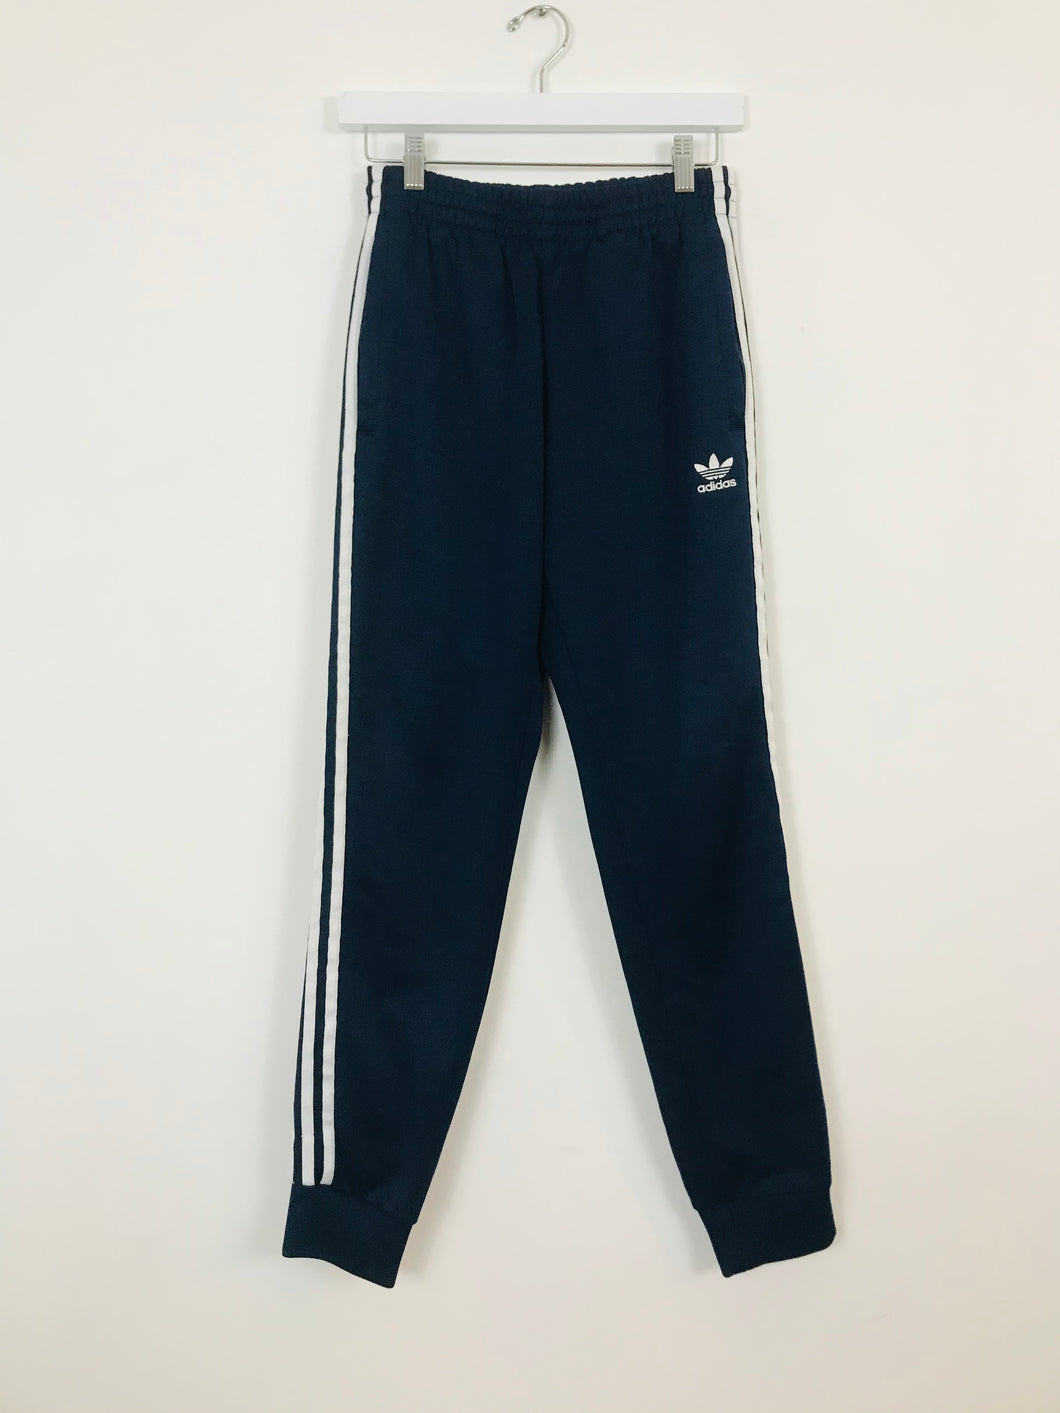 Adidas Mens Sports Tracksuit Bottoms | S | Navy Blue